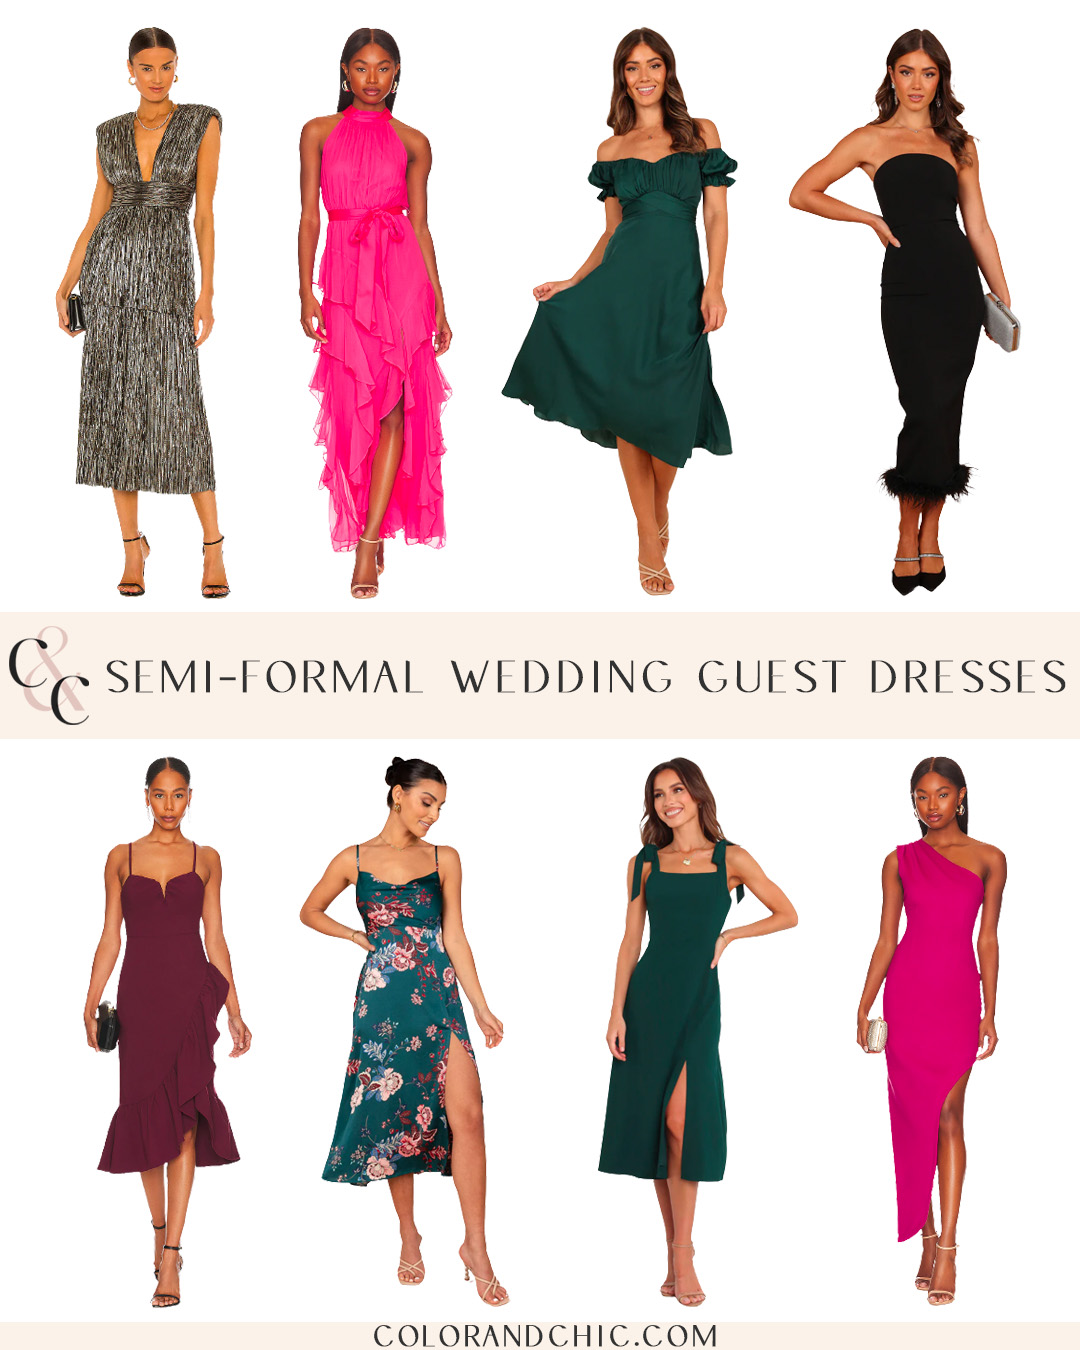 Wedding Dress Code Guide Color And Chic 1226